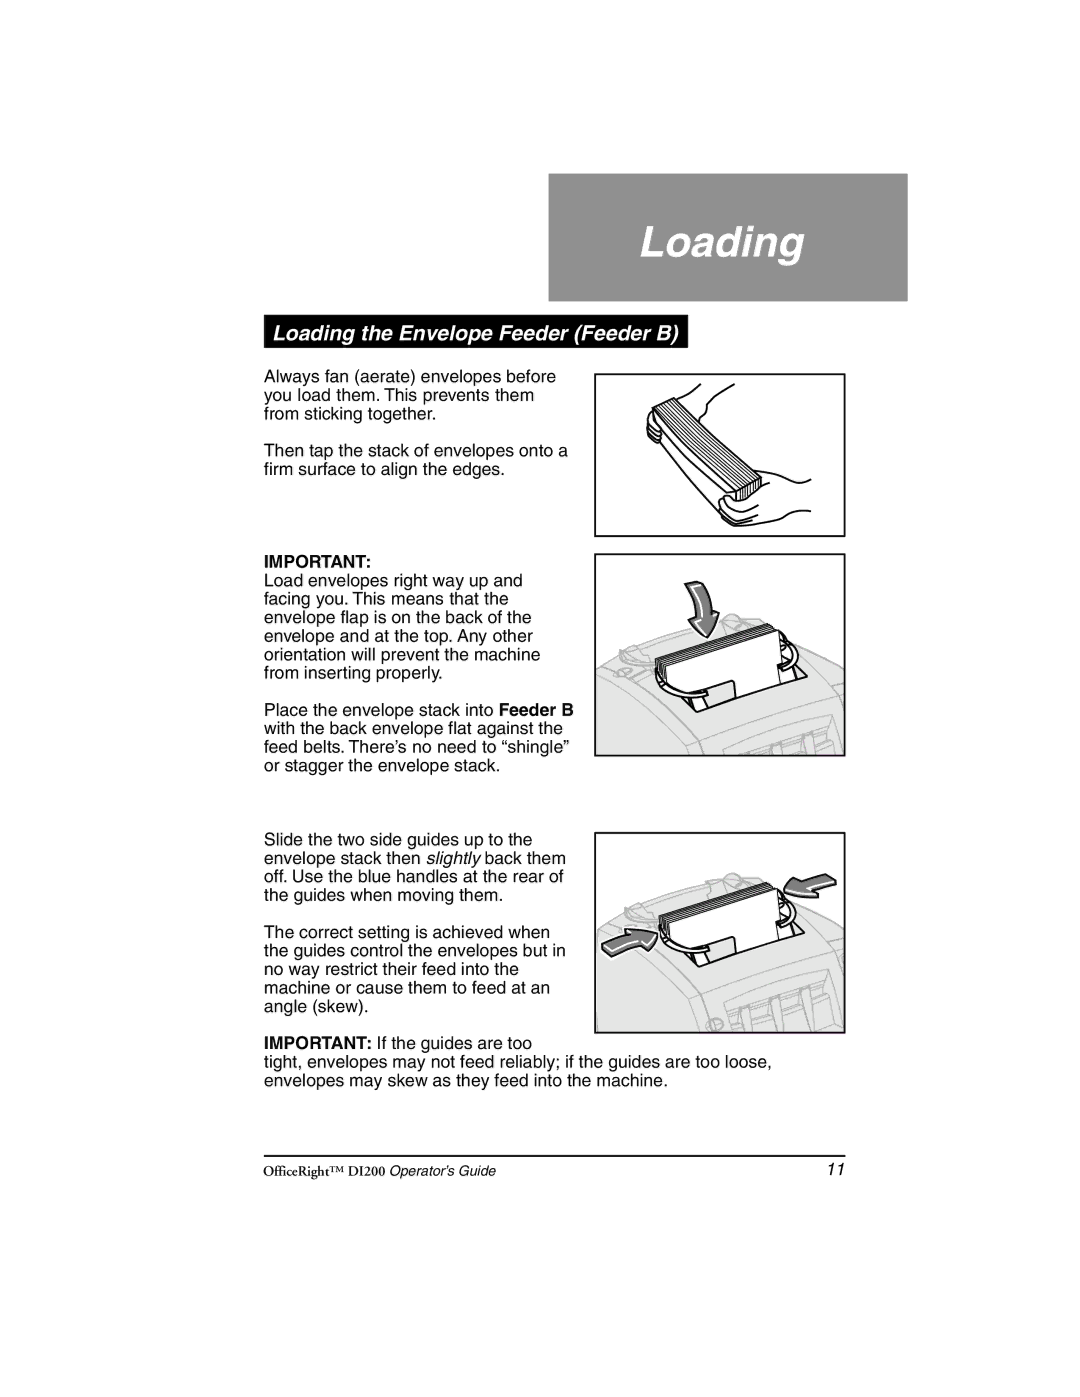 Pitney Bowes DI200 manual Loading the Envelope Feeder Feeder B 